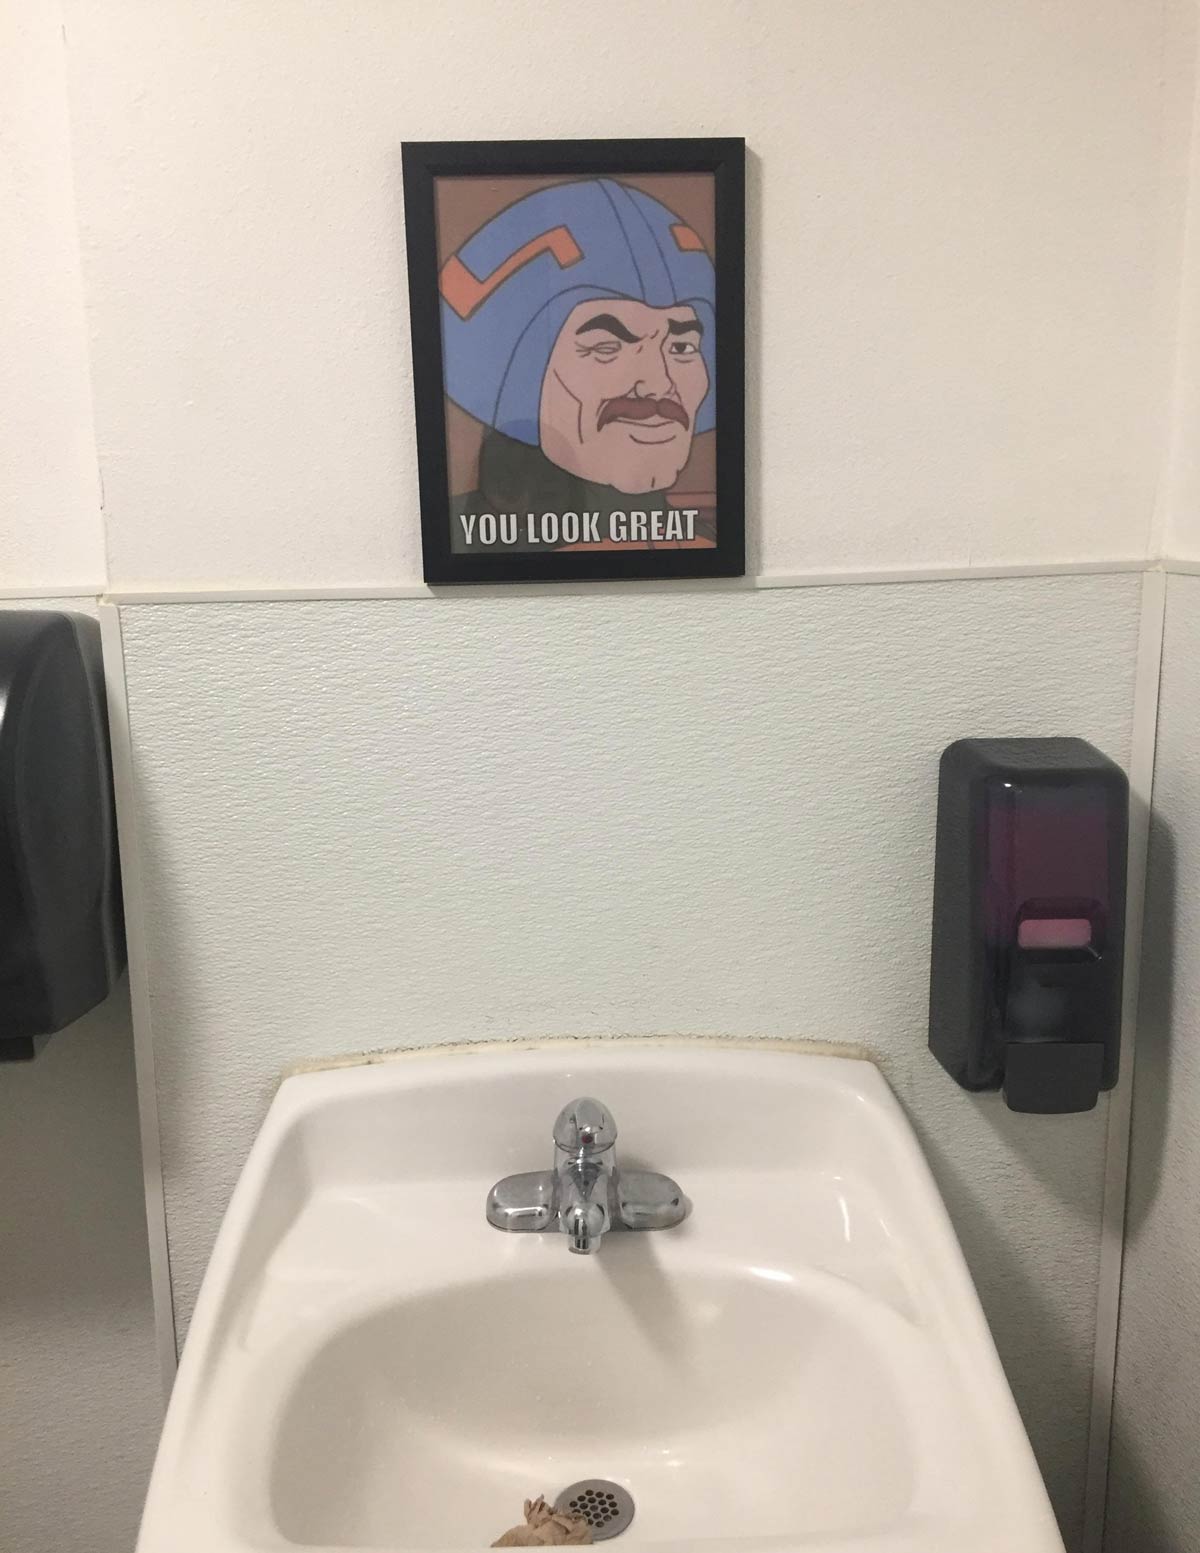 This bathroom that has an encouraging picture instead of a mirror